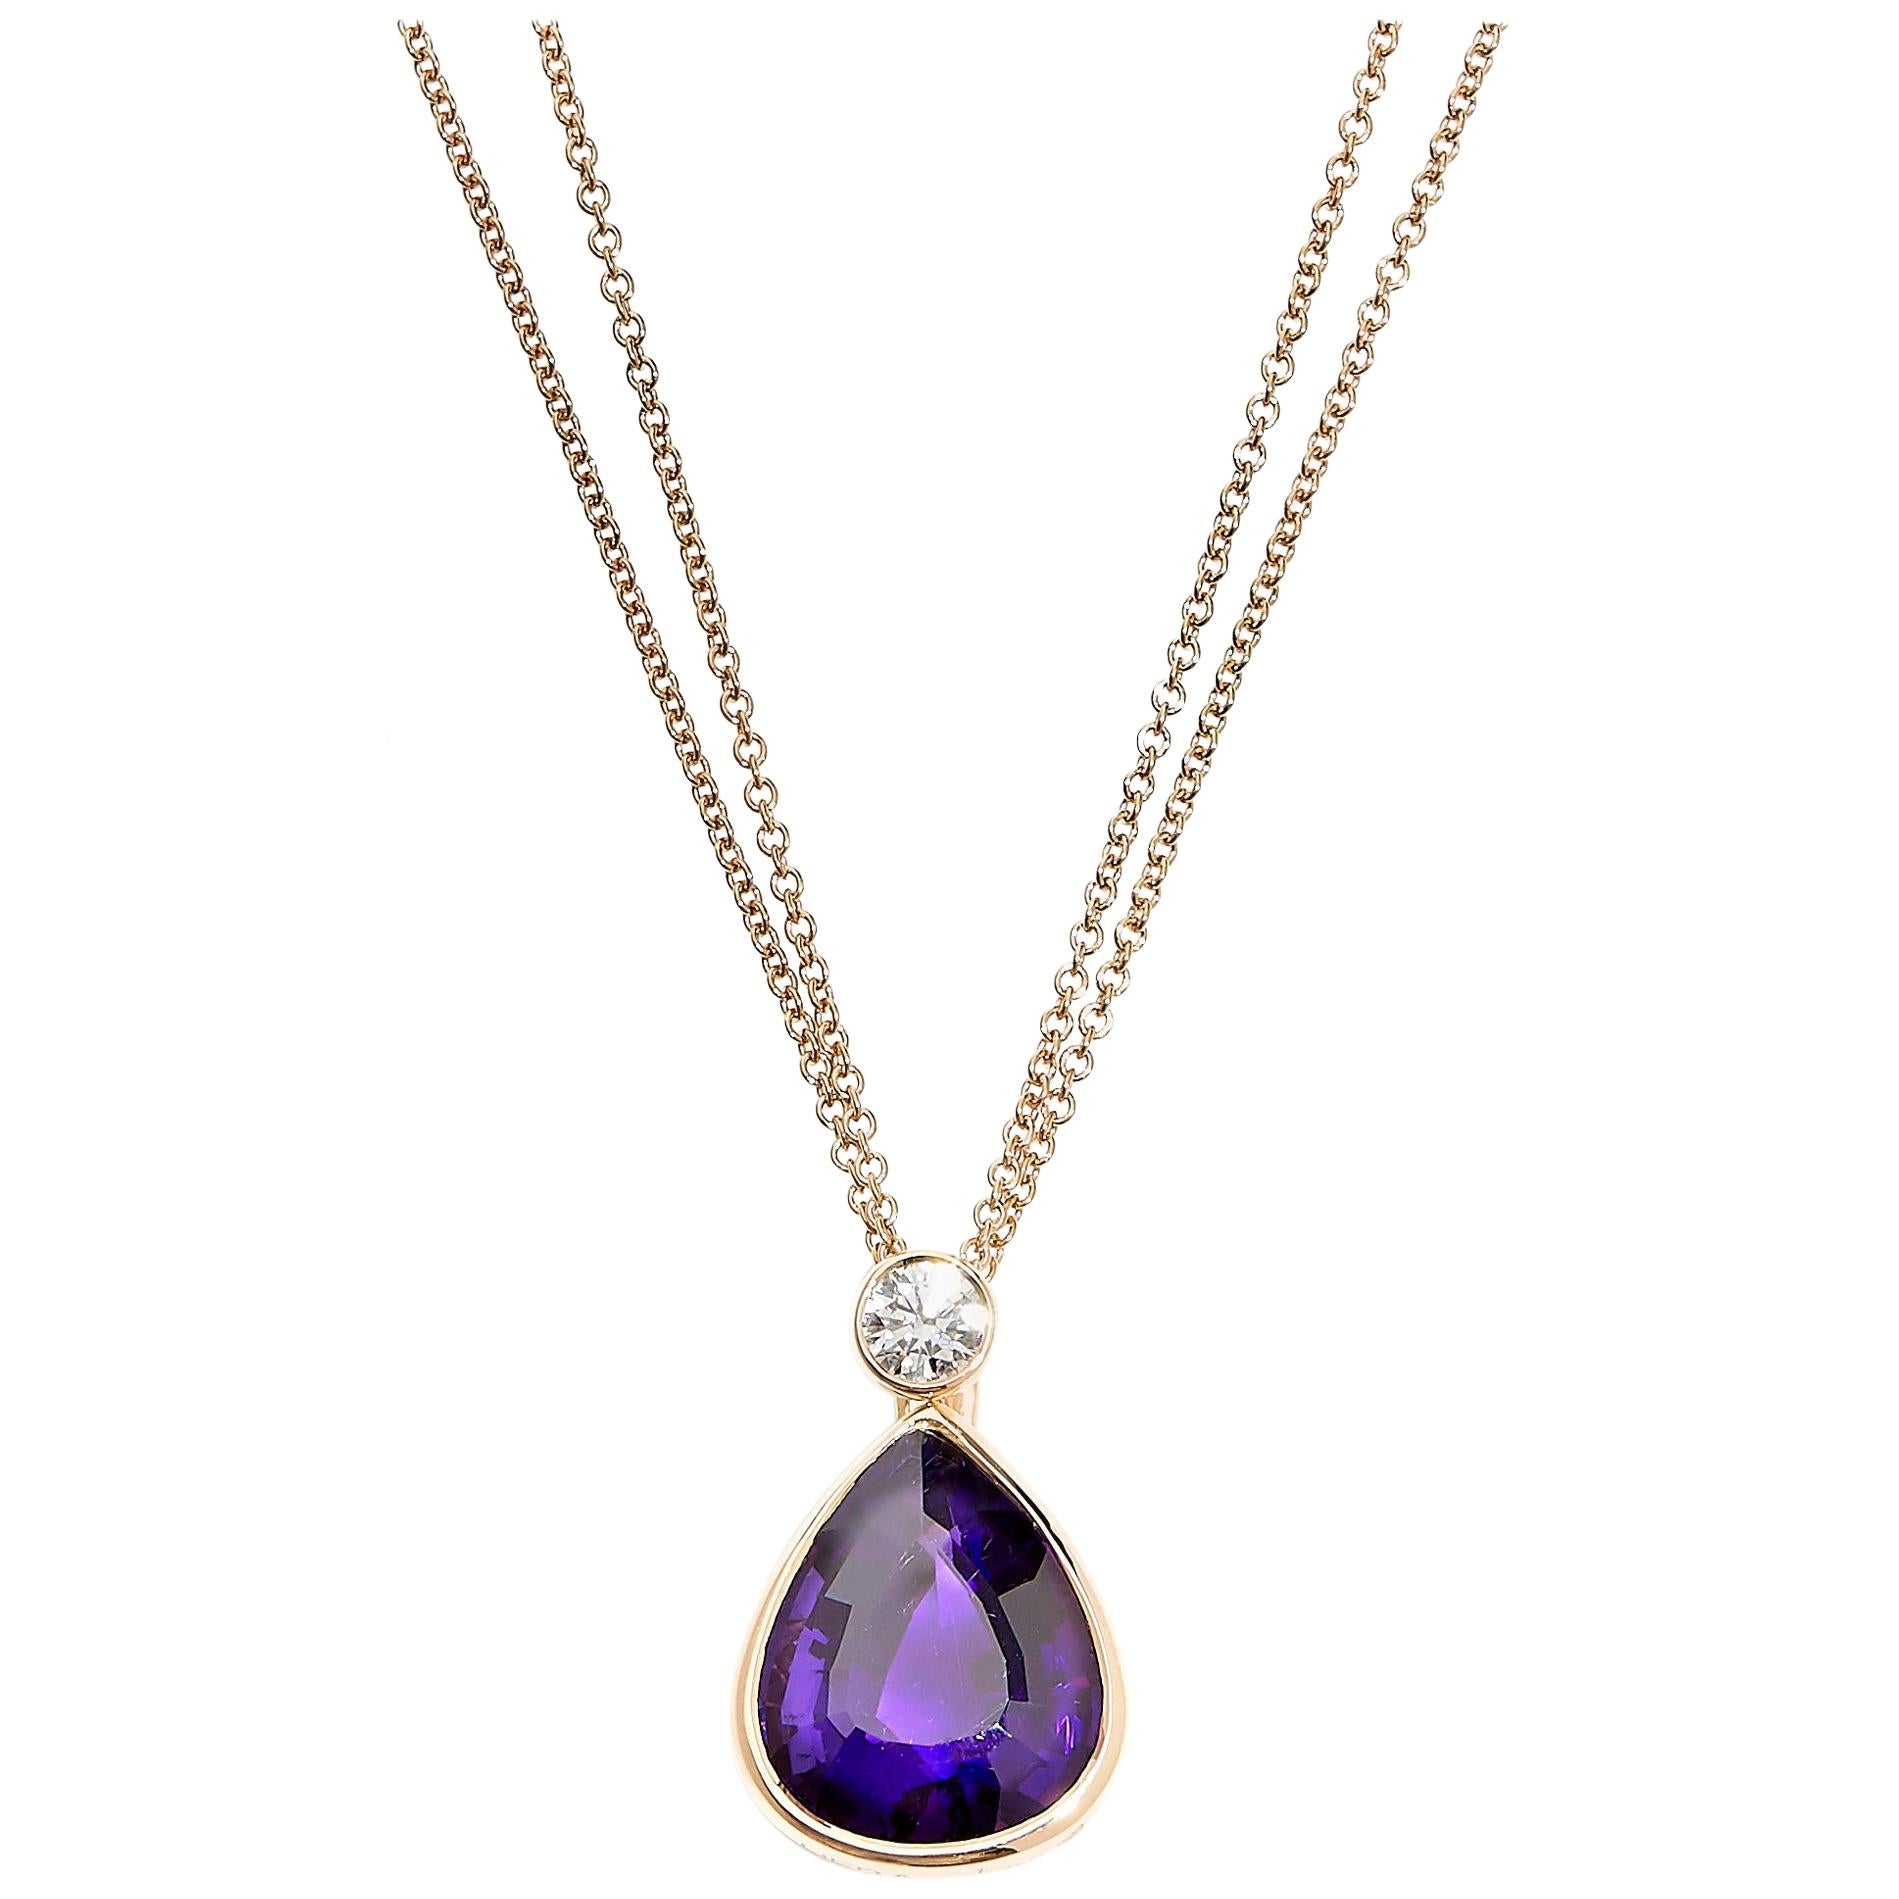 18 Karat Rose Gold Pendant Necklace set with 9.21 Carat Amethyst and Diamond  For Sale